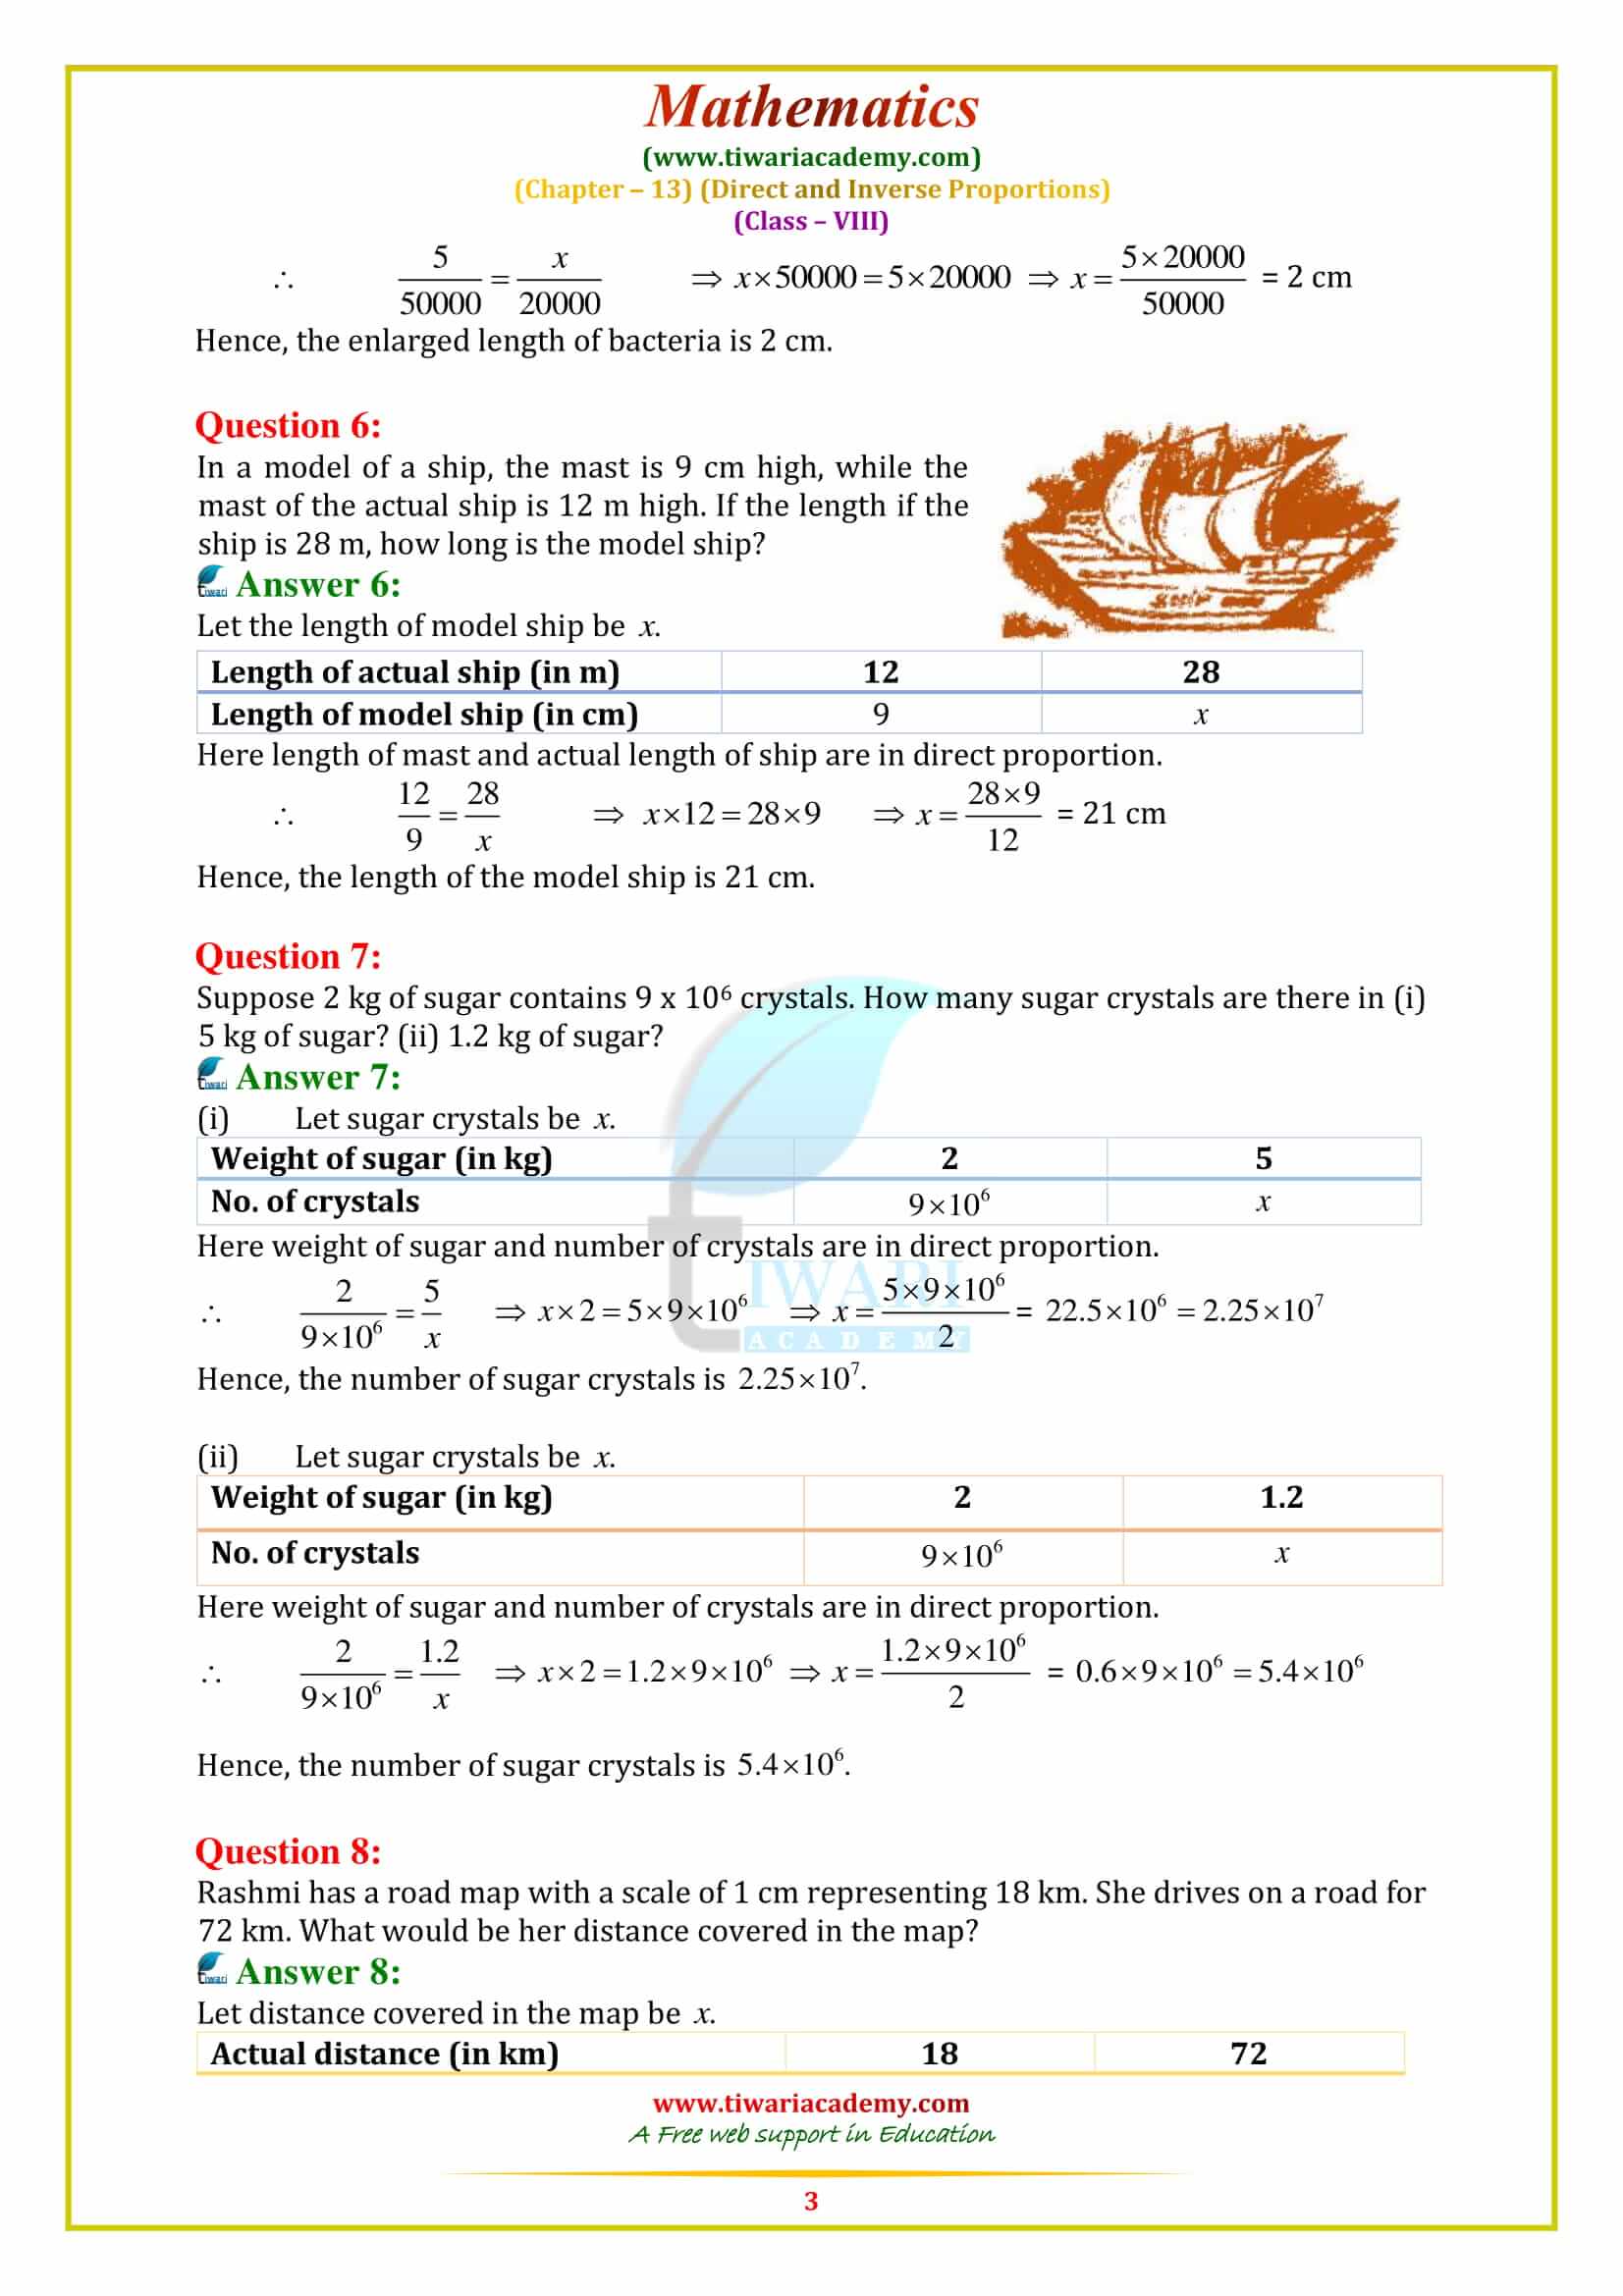 NCERT Solutions for Class 8 Maths Chapter 13 Exercise 13.1 in pdf form free